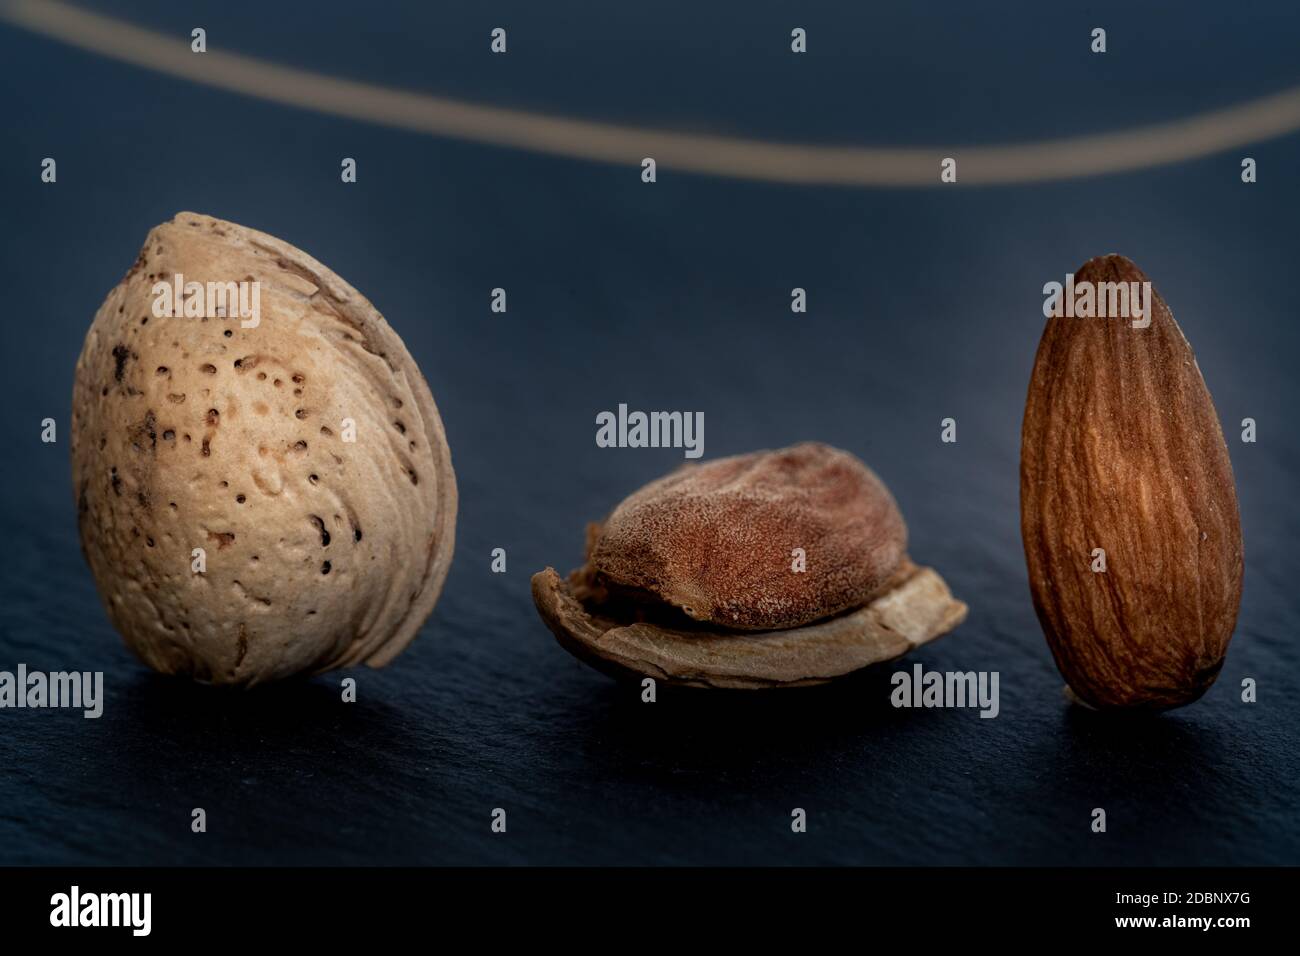 Close-up of three isolated almonds : one in its shell, one with open shell, one without shell. nuts are standing up on a slate table with dark backgro Stock Photo